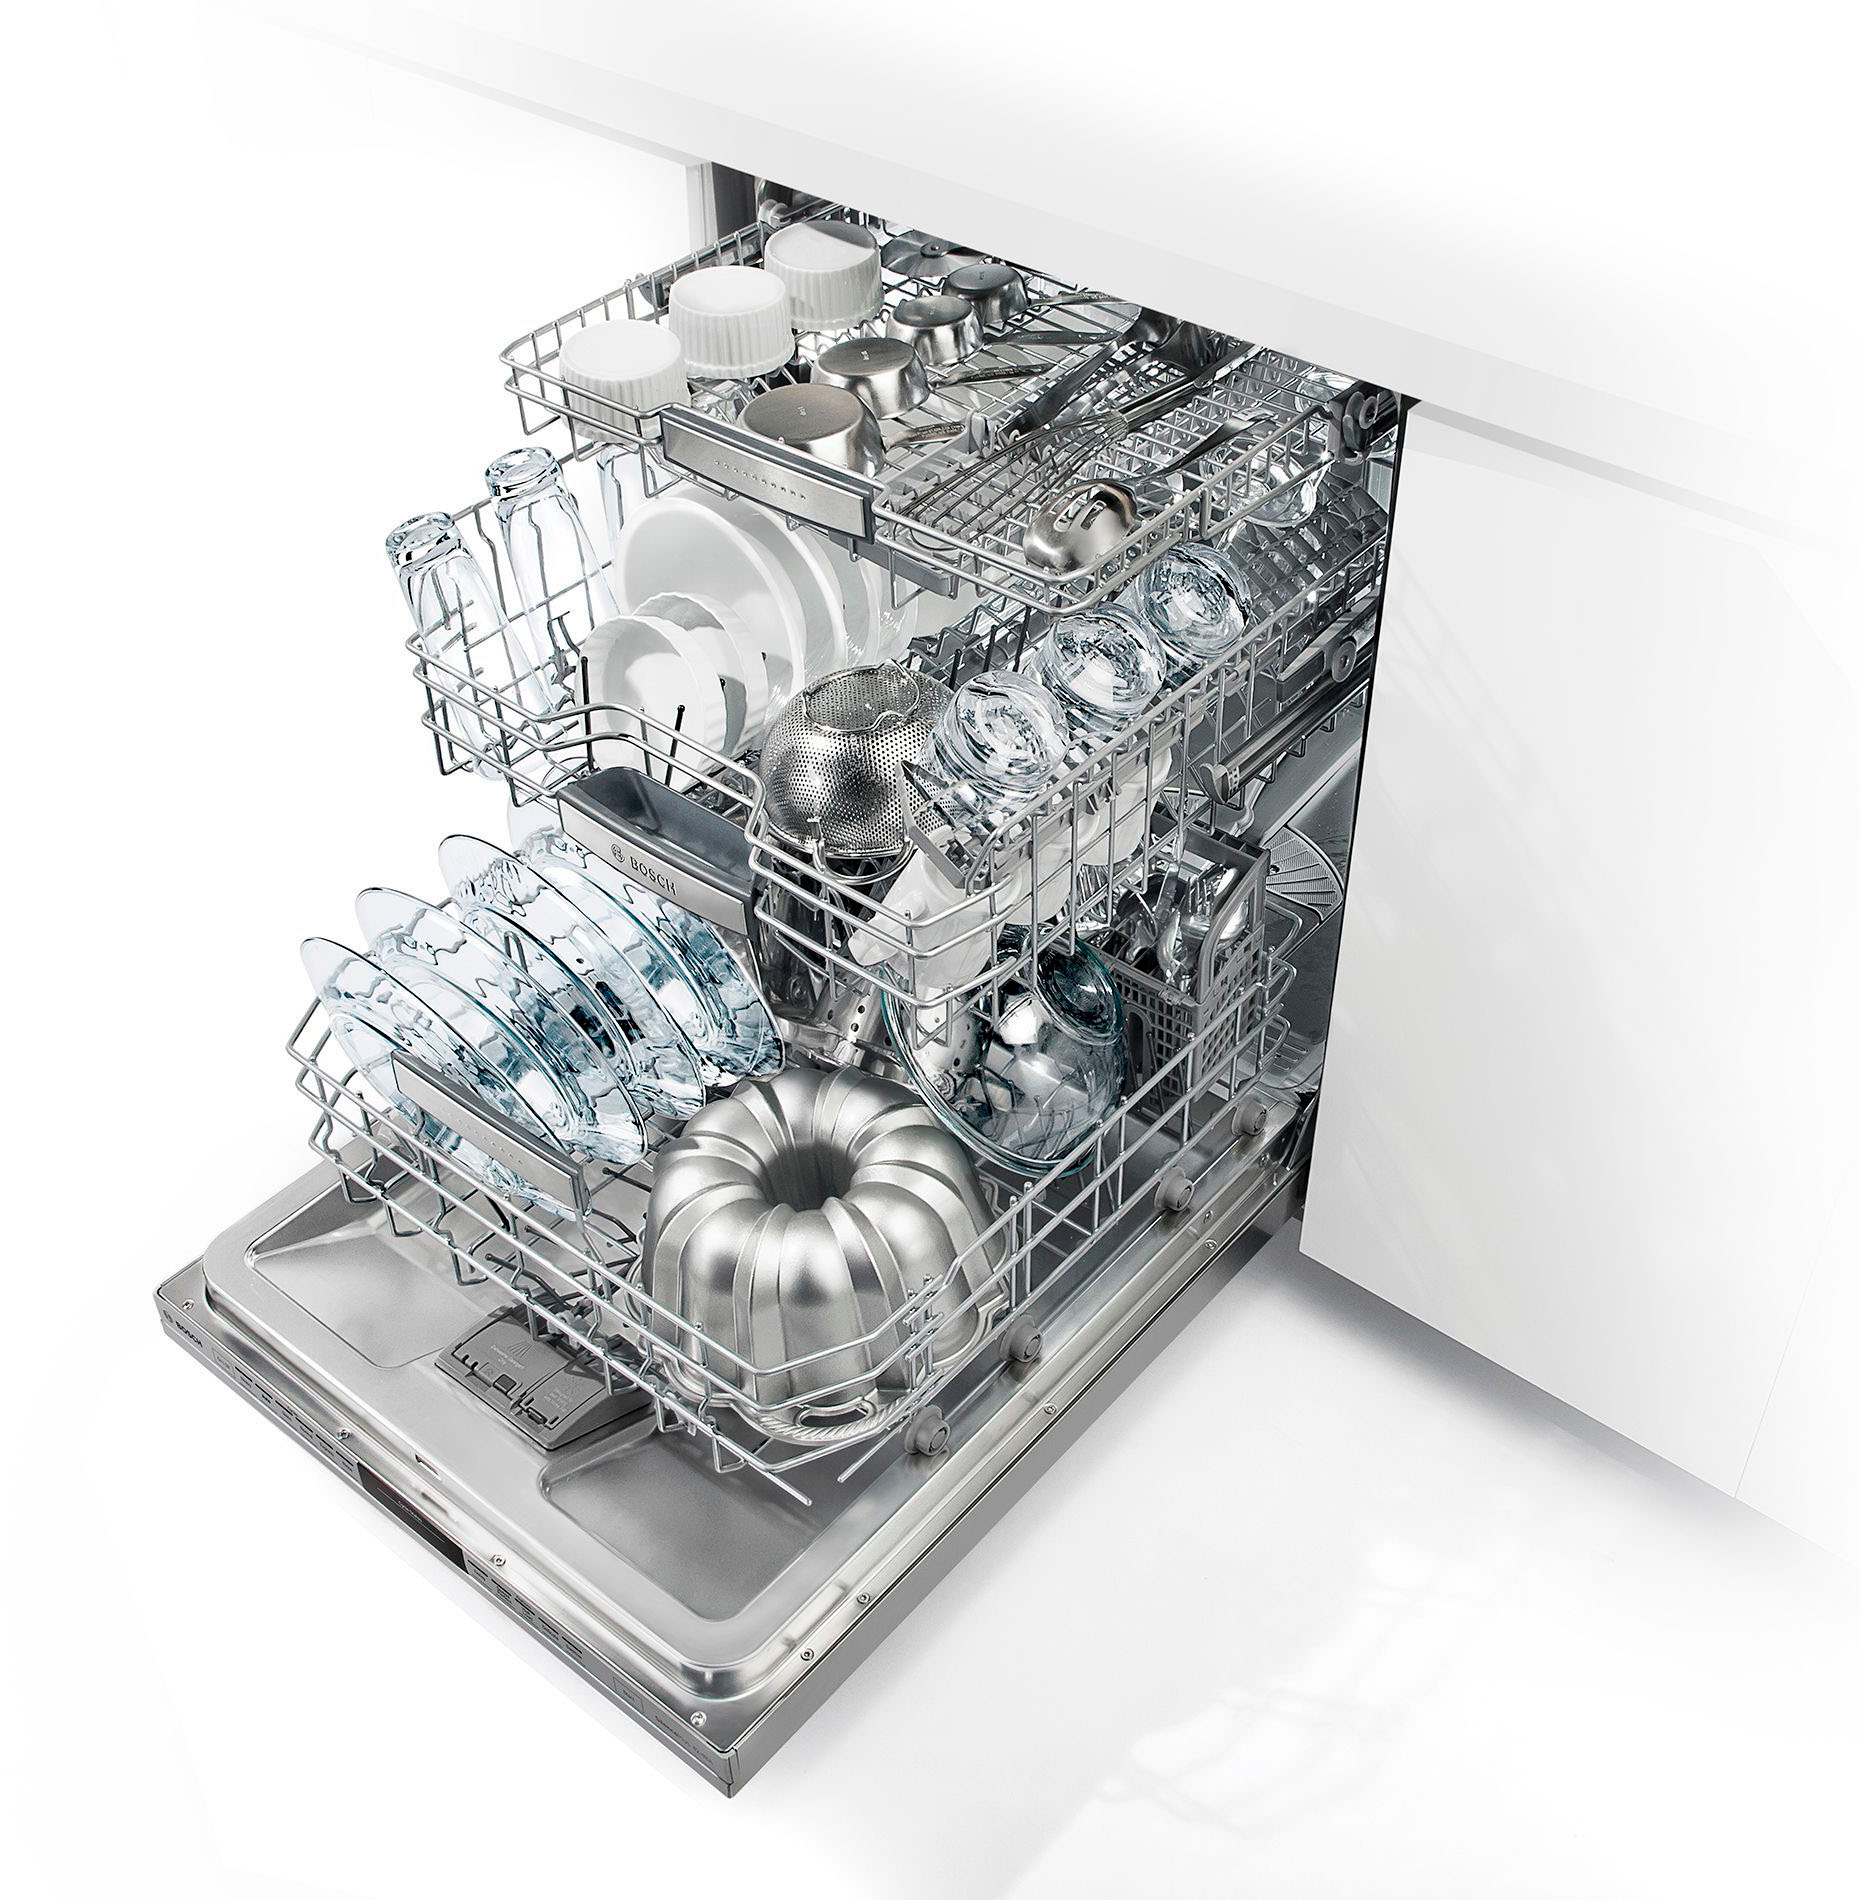 Bosch 300 Series 24 Front Control Built-In Stainless Steel Tub Dishwasher  with Stainless Steel Tub with 3rd Rack, 44 dBA Stainless Steel SHEM63W55N -  Best Buy